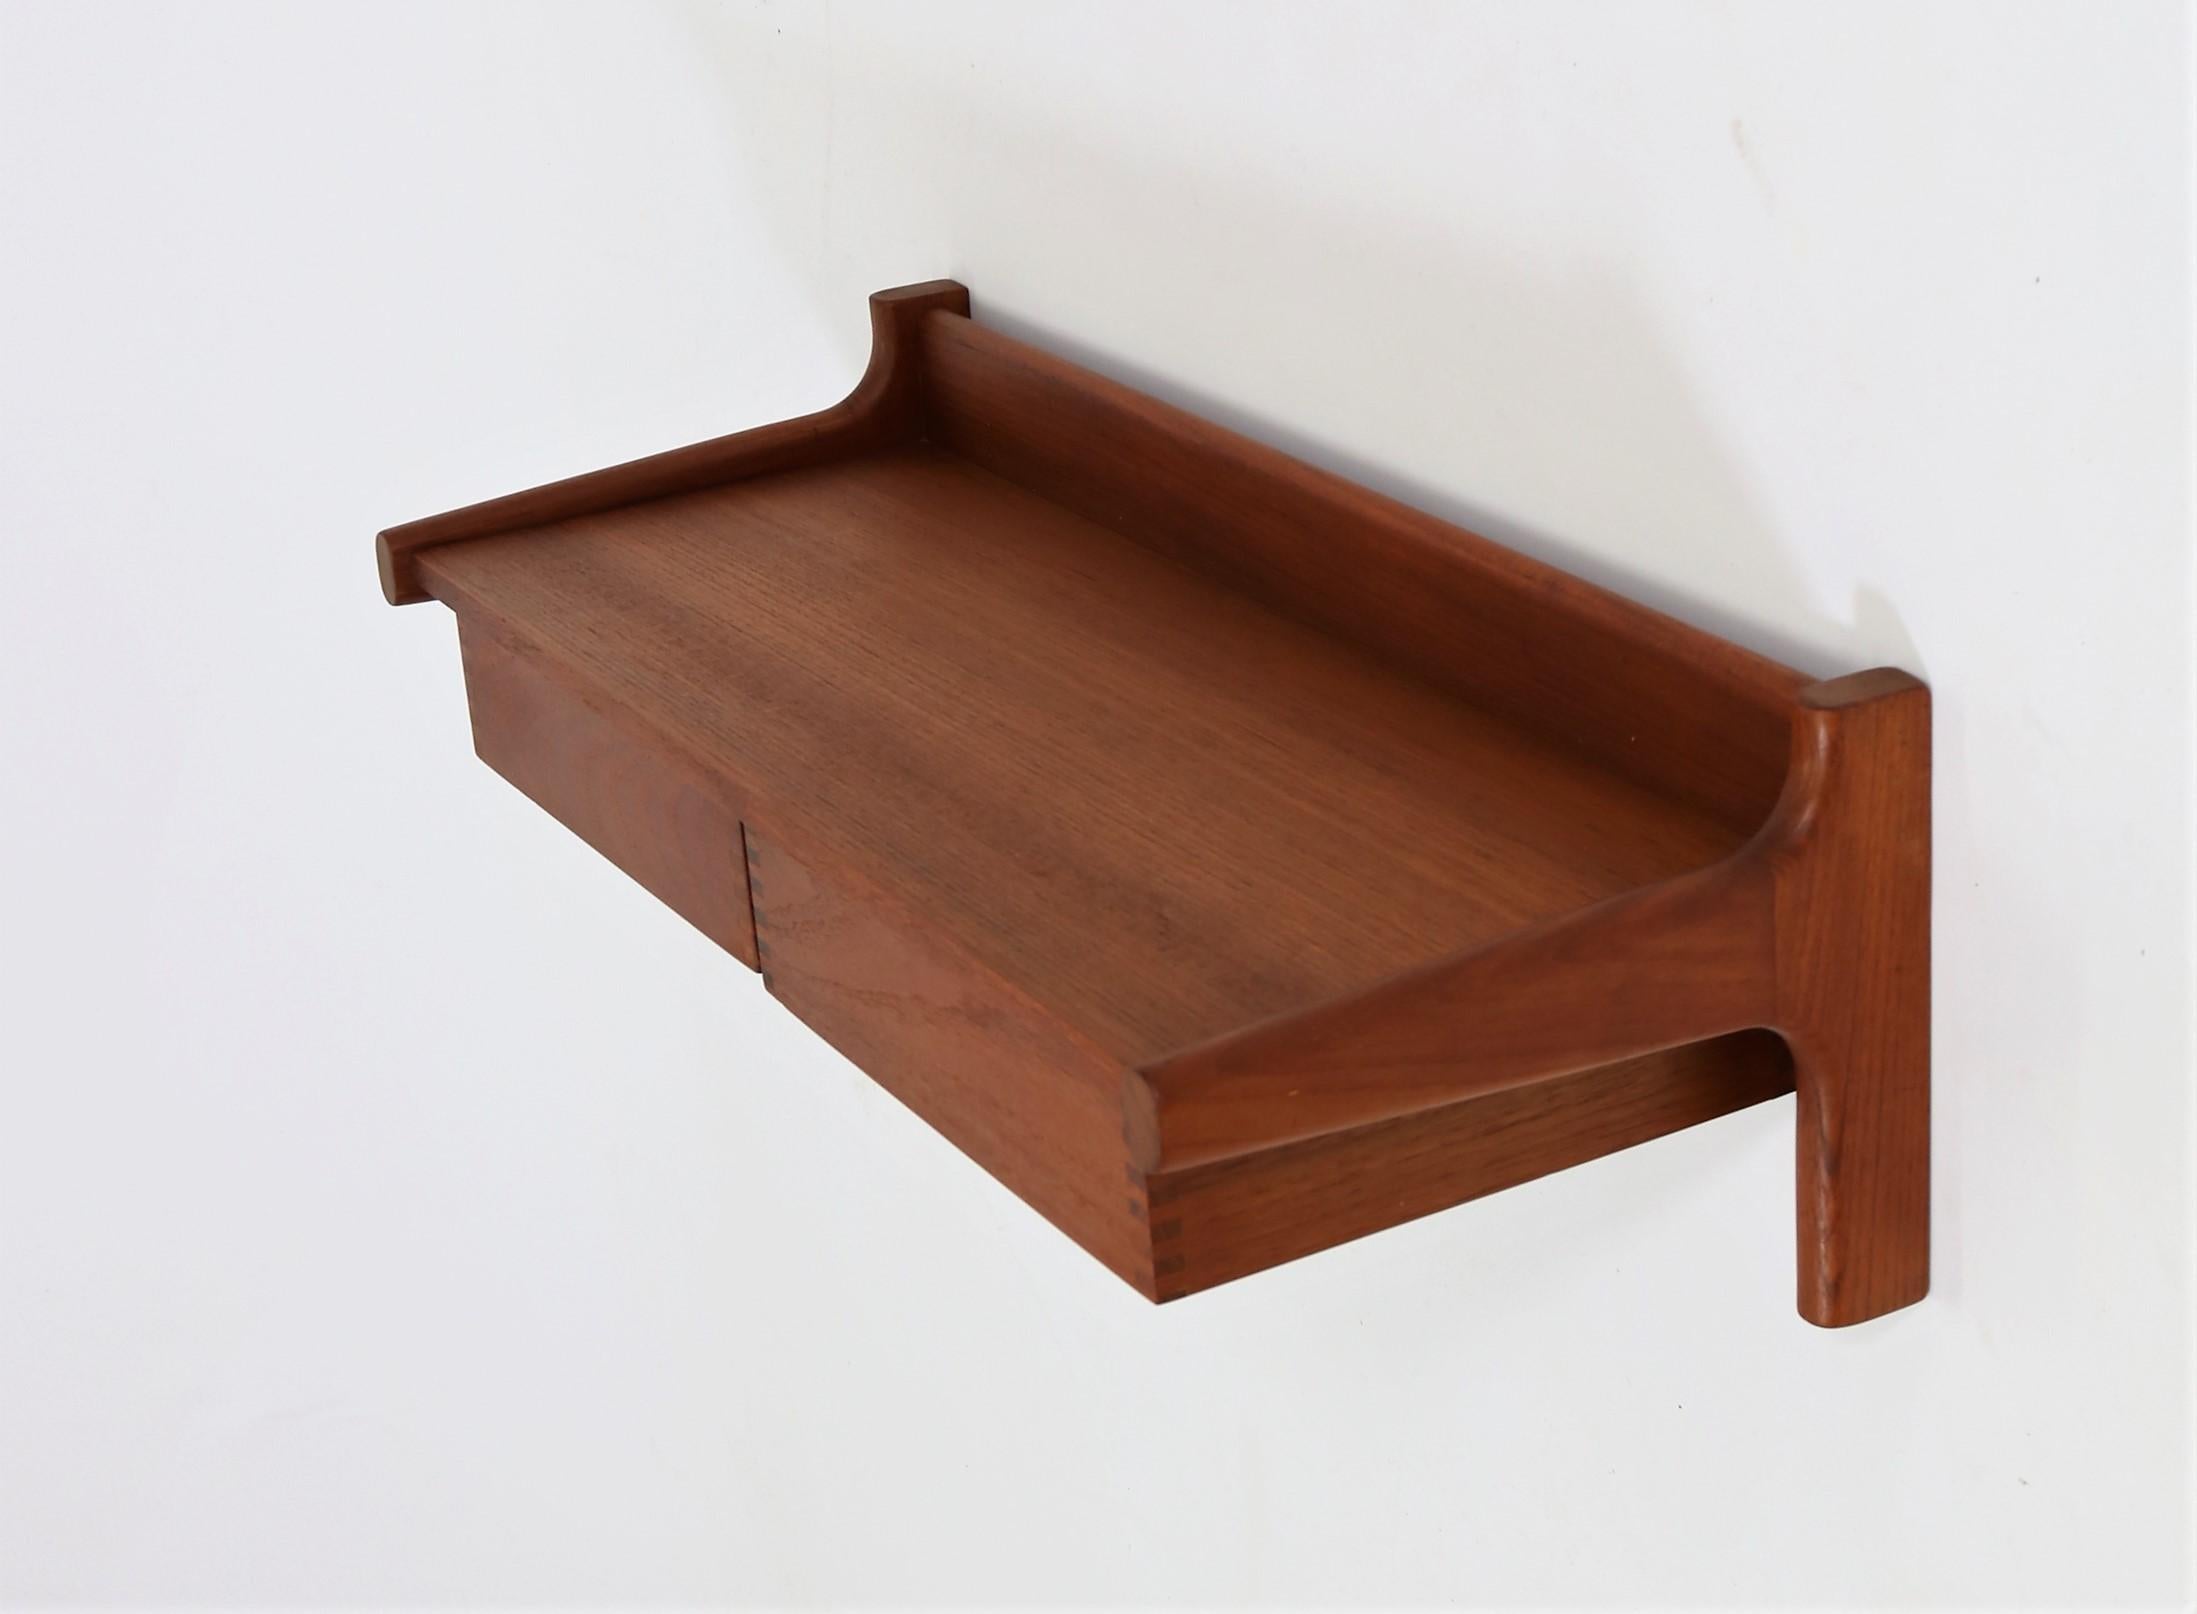 Stylish Mid-Century Modern design by Kai Kristiansen for Dyrlund. Wall-mounted shelf with two drawers. The console features a simple design with well crafted exposed finger joints. Rare piece of original Danish design from the early 1960s.